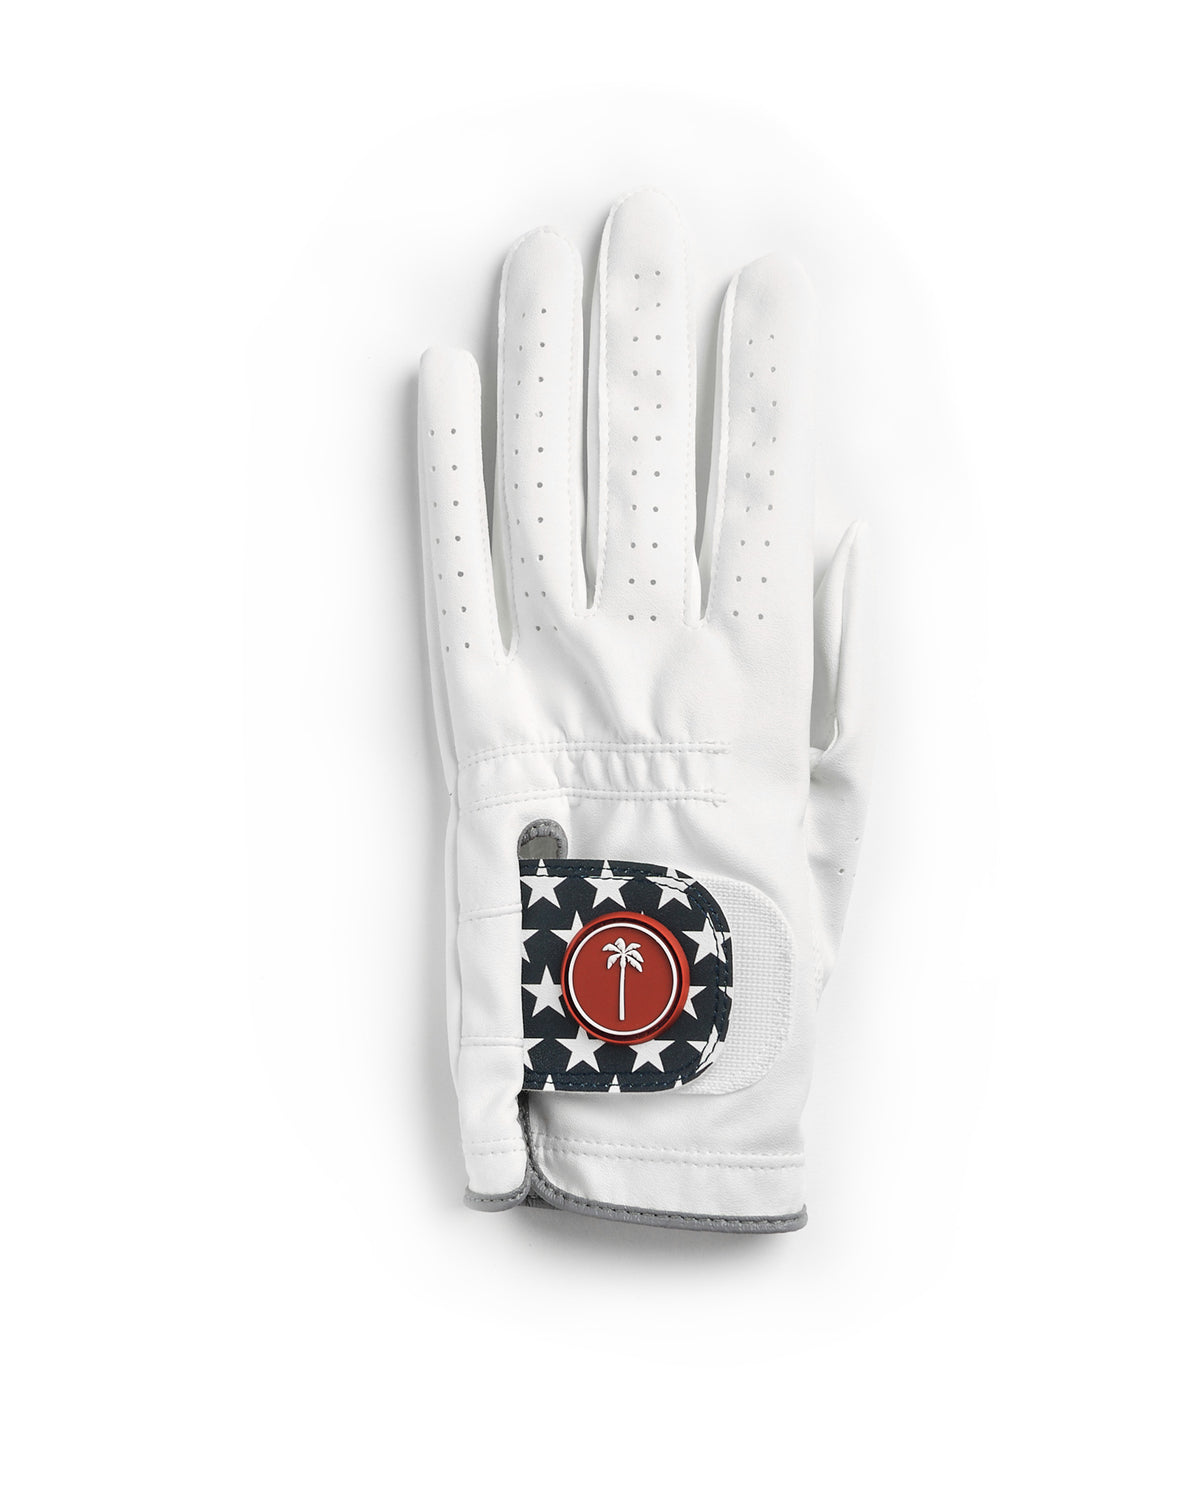 Women's AWG Stars and Stripes Glove (Vegan Leather) - Palm Golf Co.